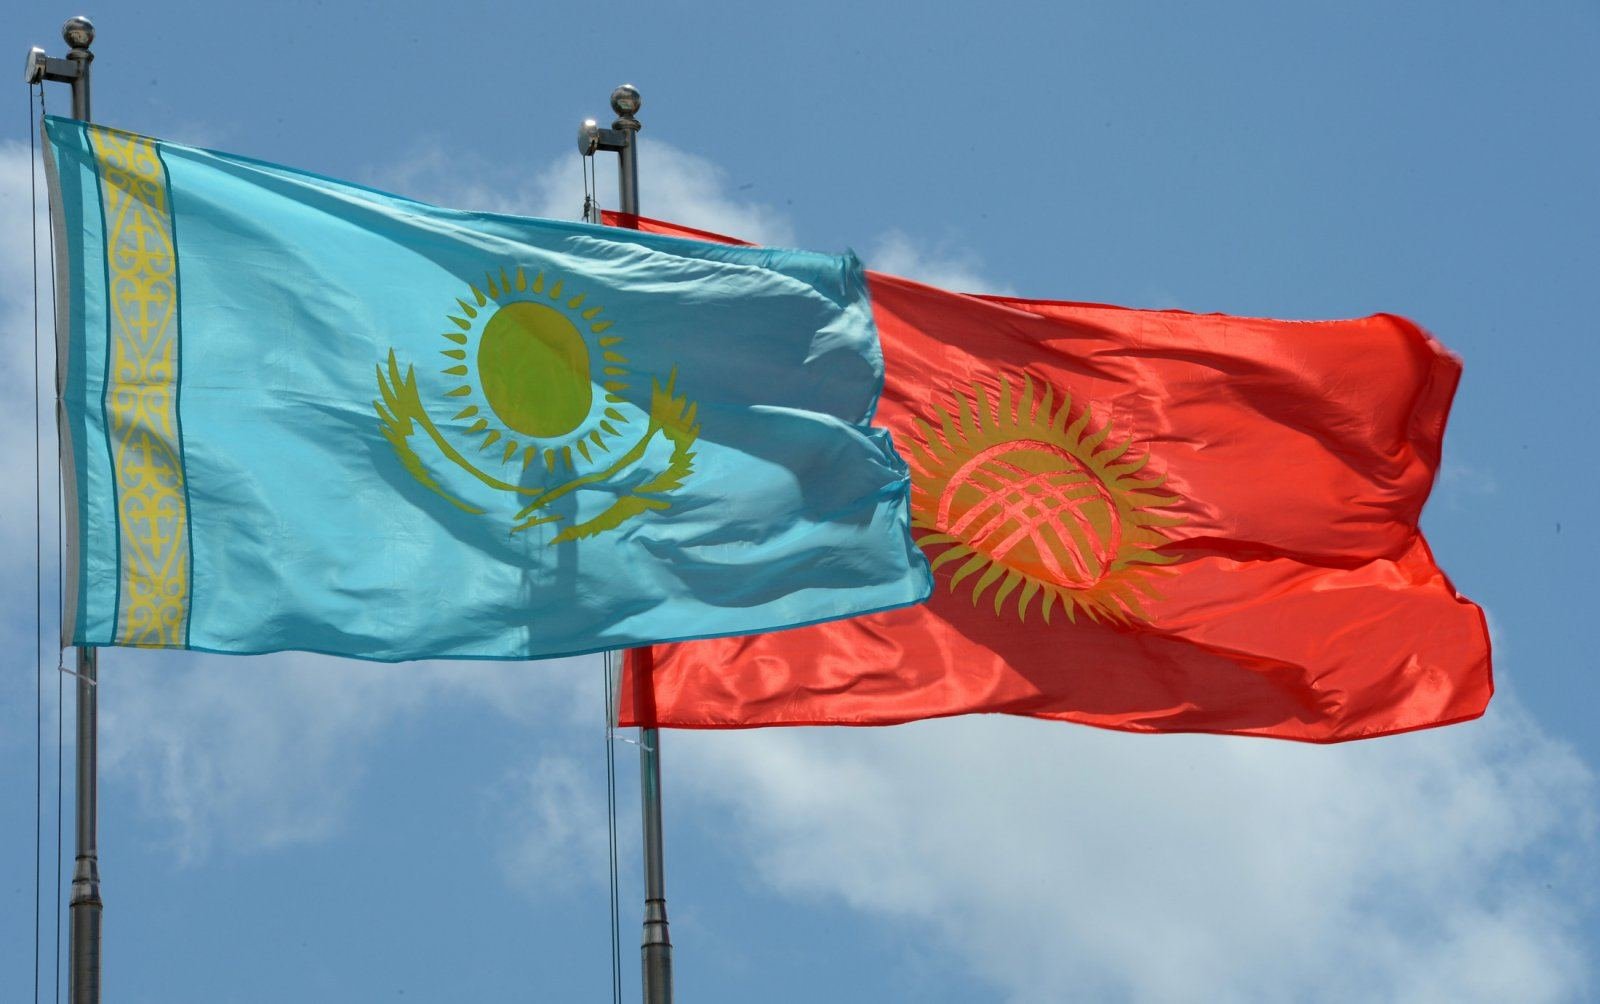 Kazakhstan to sign agreement on expanding alliance with Kyrgyzstan